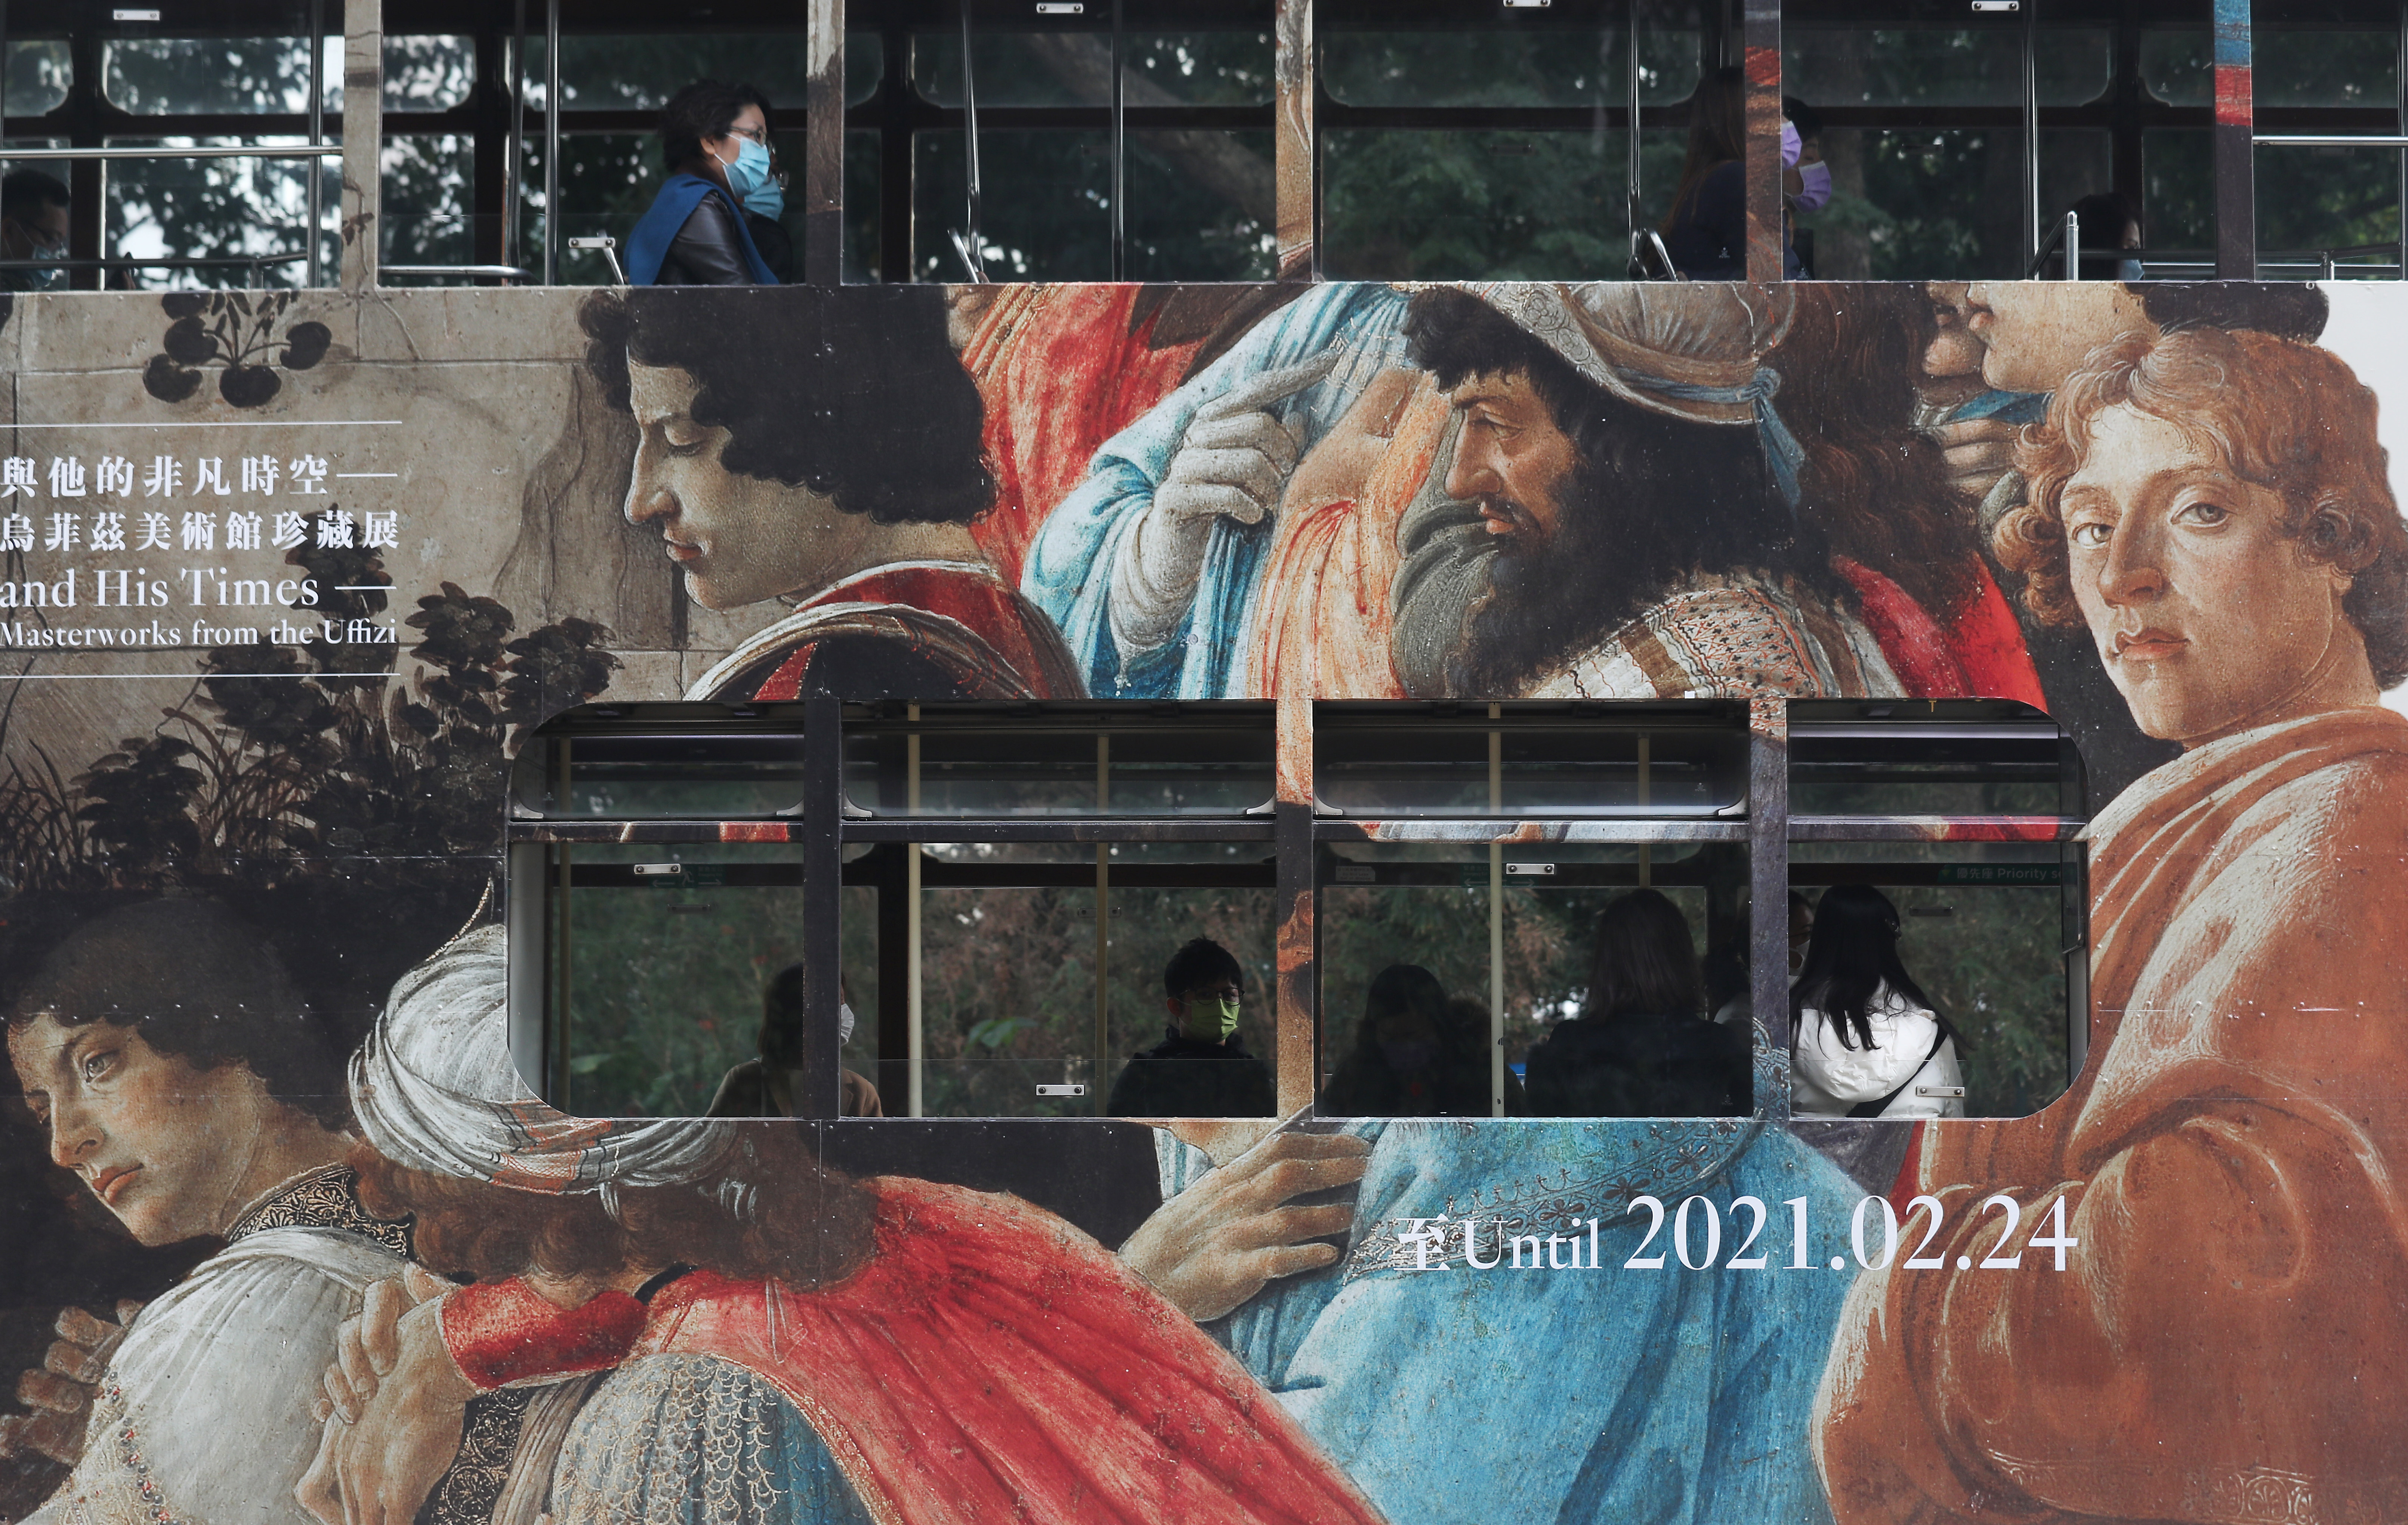 People travel on a tram covered in an ad for the “Botticelli and His Times” exhibition at the Hong Kong Museum of Art in December 2020. Photo: Xiaomei Chen